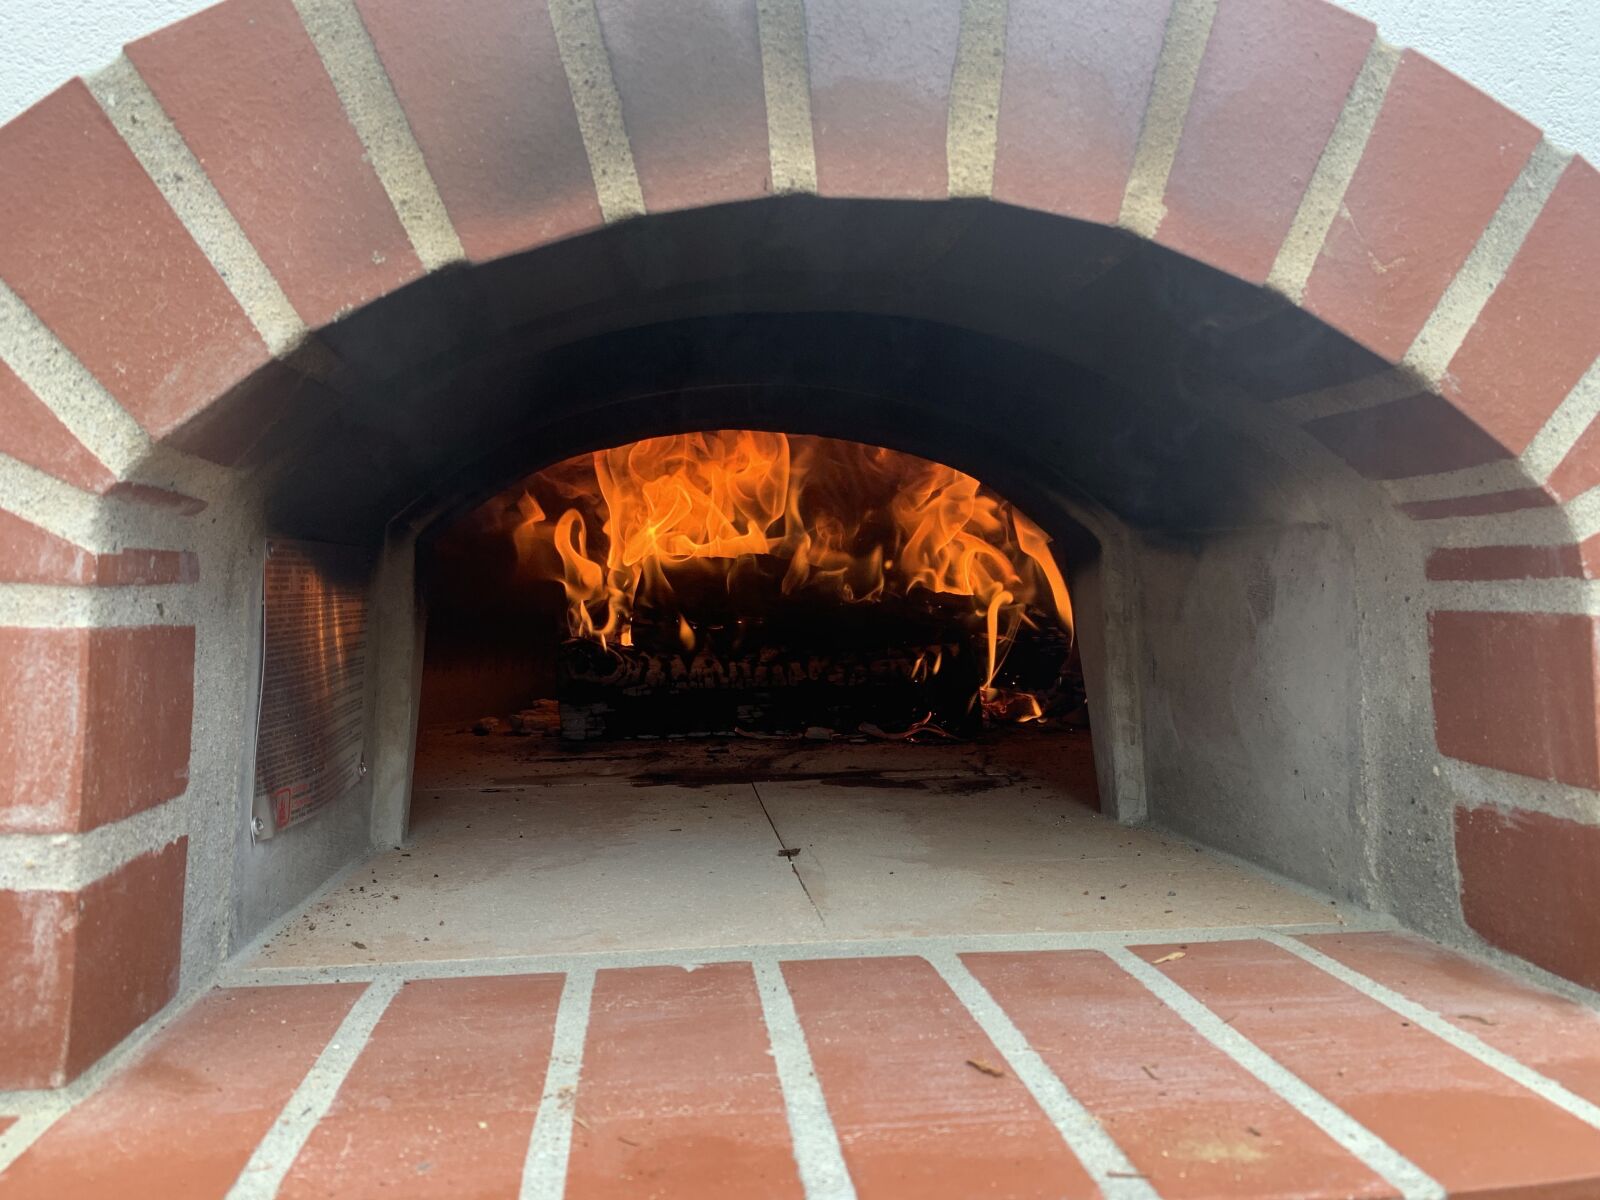 Apple iPhone XS Max + iPhone XS Max back dual camera 4.25mm f/1.8 sample photo. Pizza oven, fire, oven photography